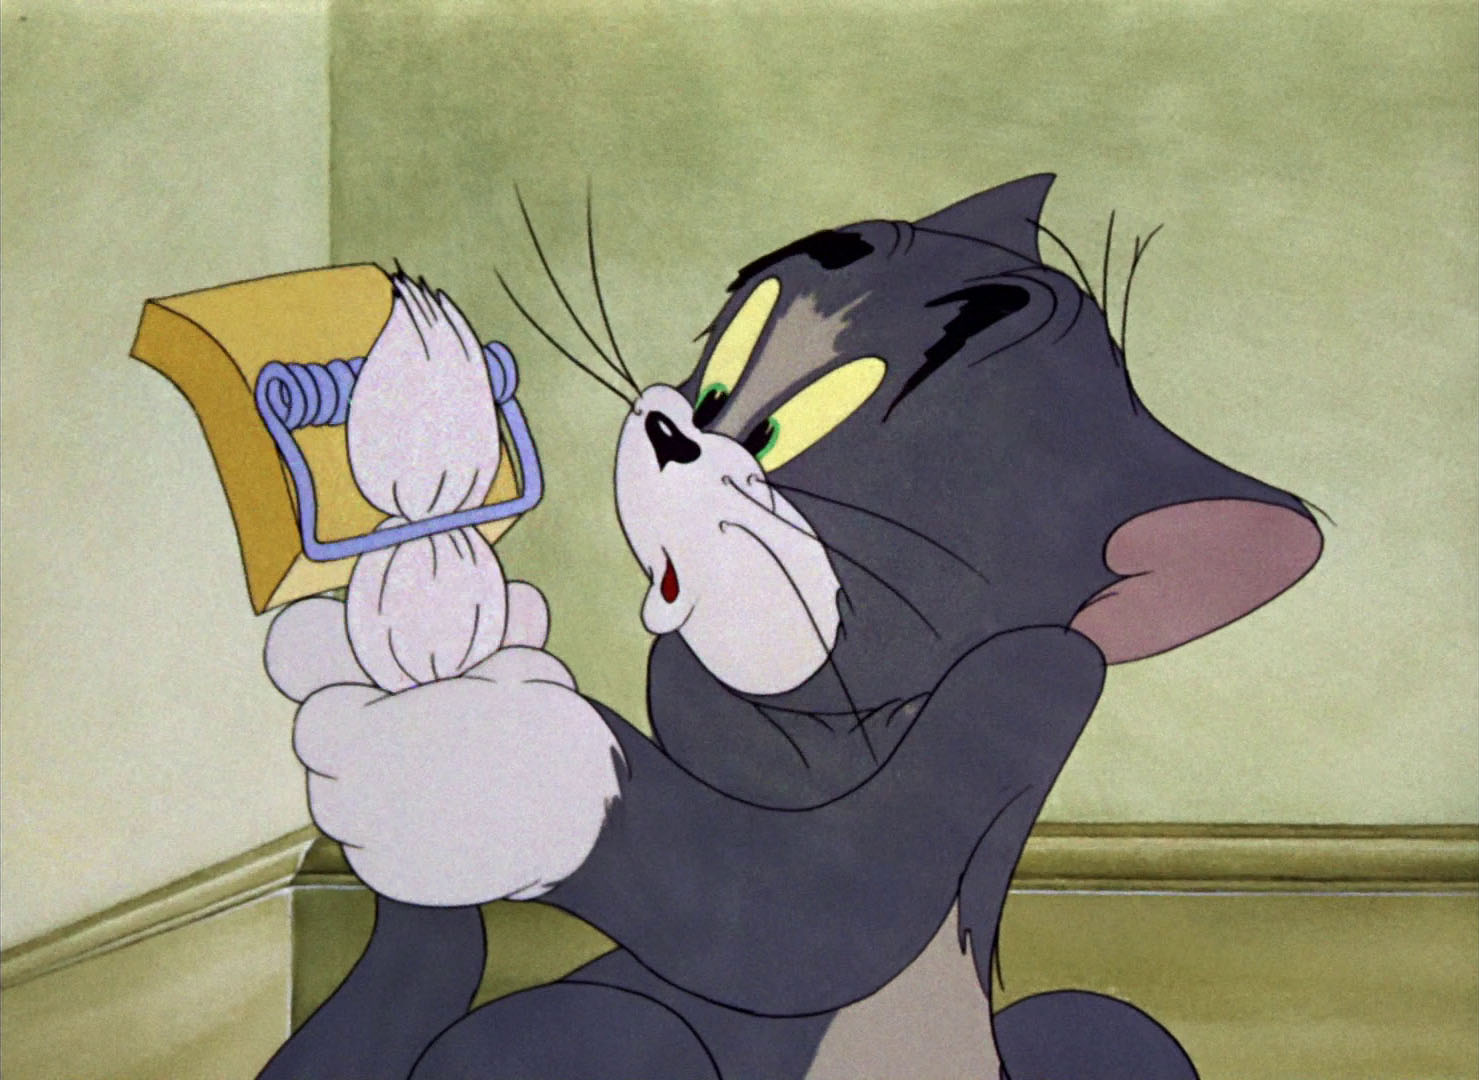 Tom & Jerry Pictures: "Dog Trouble"